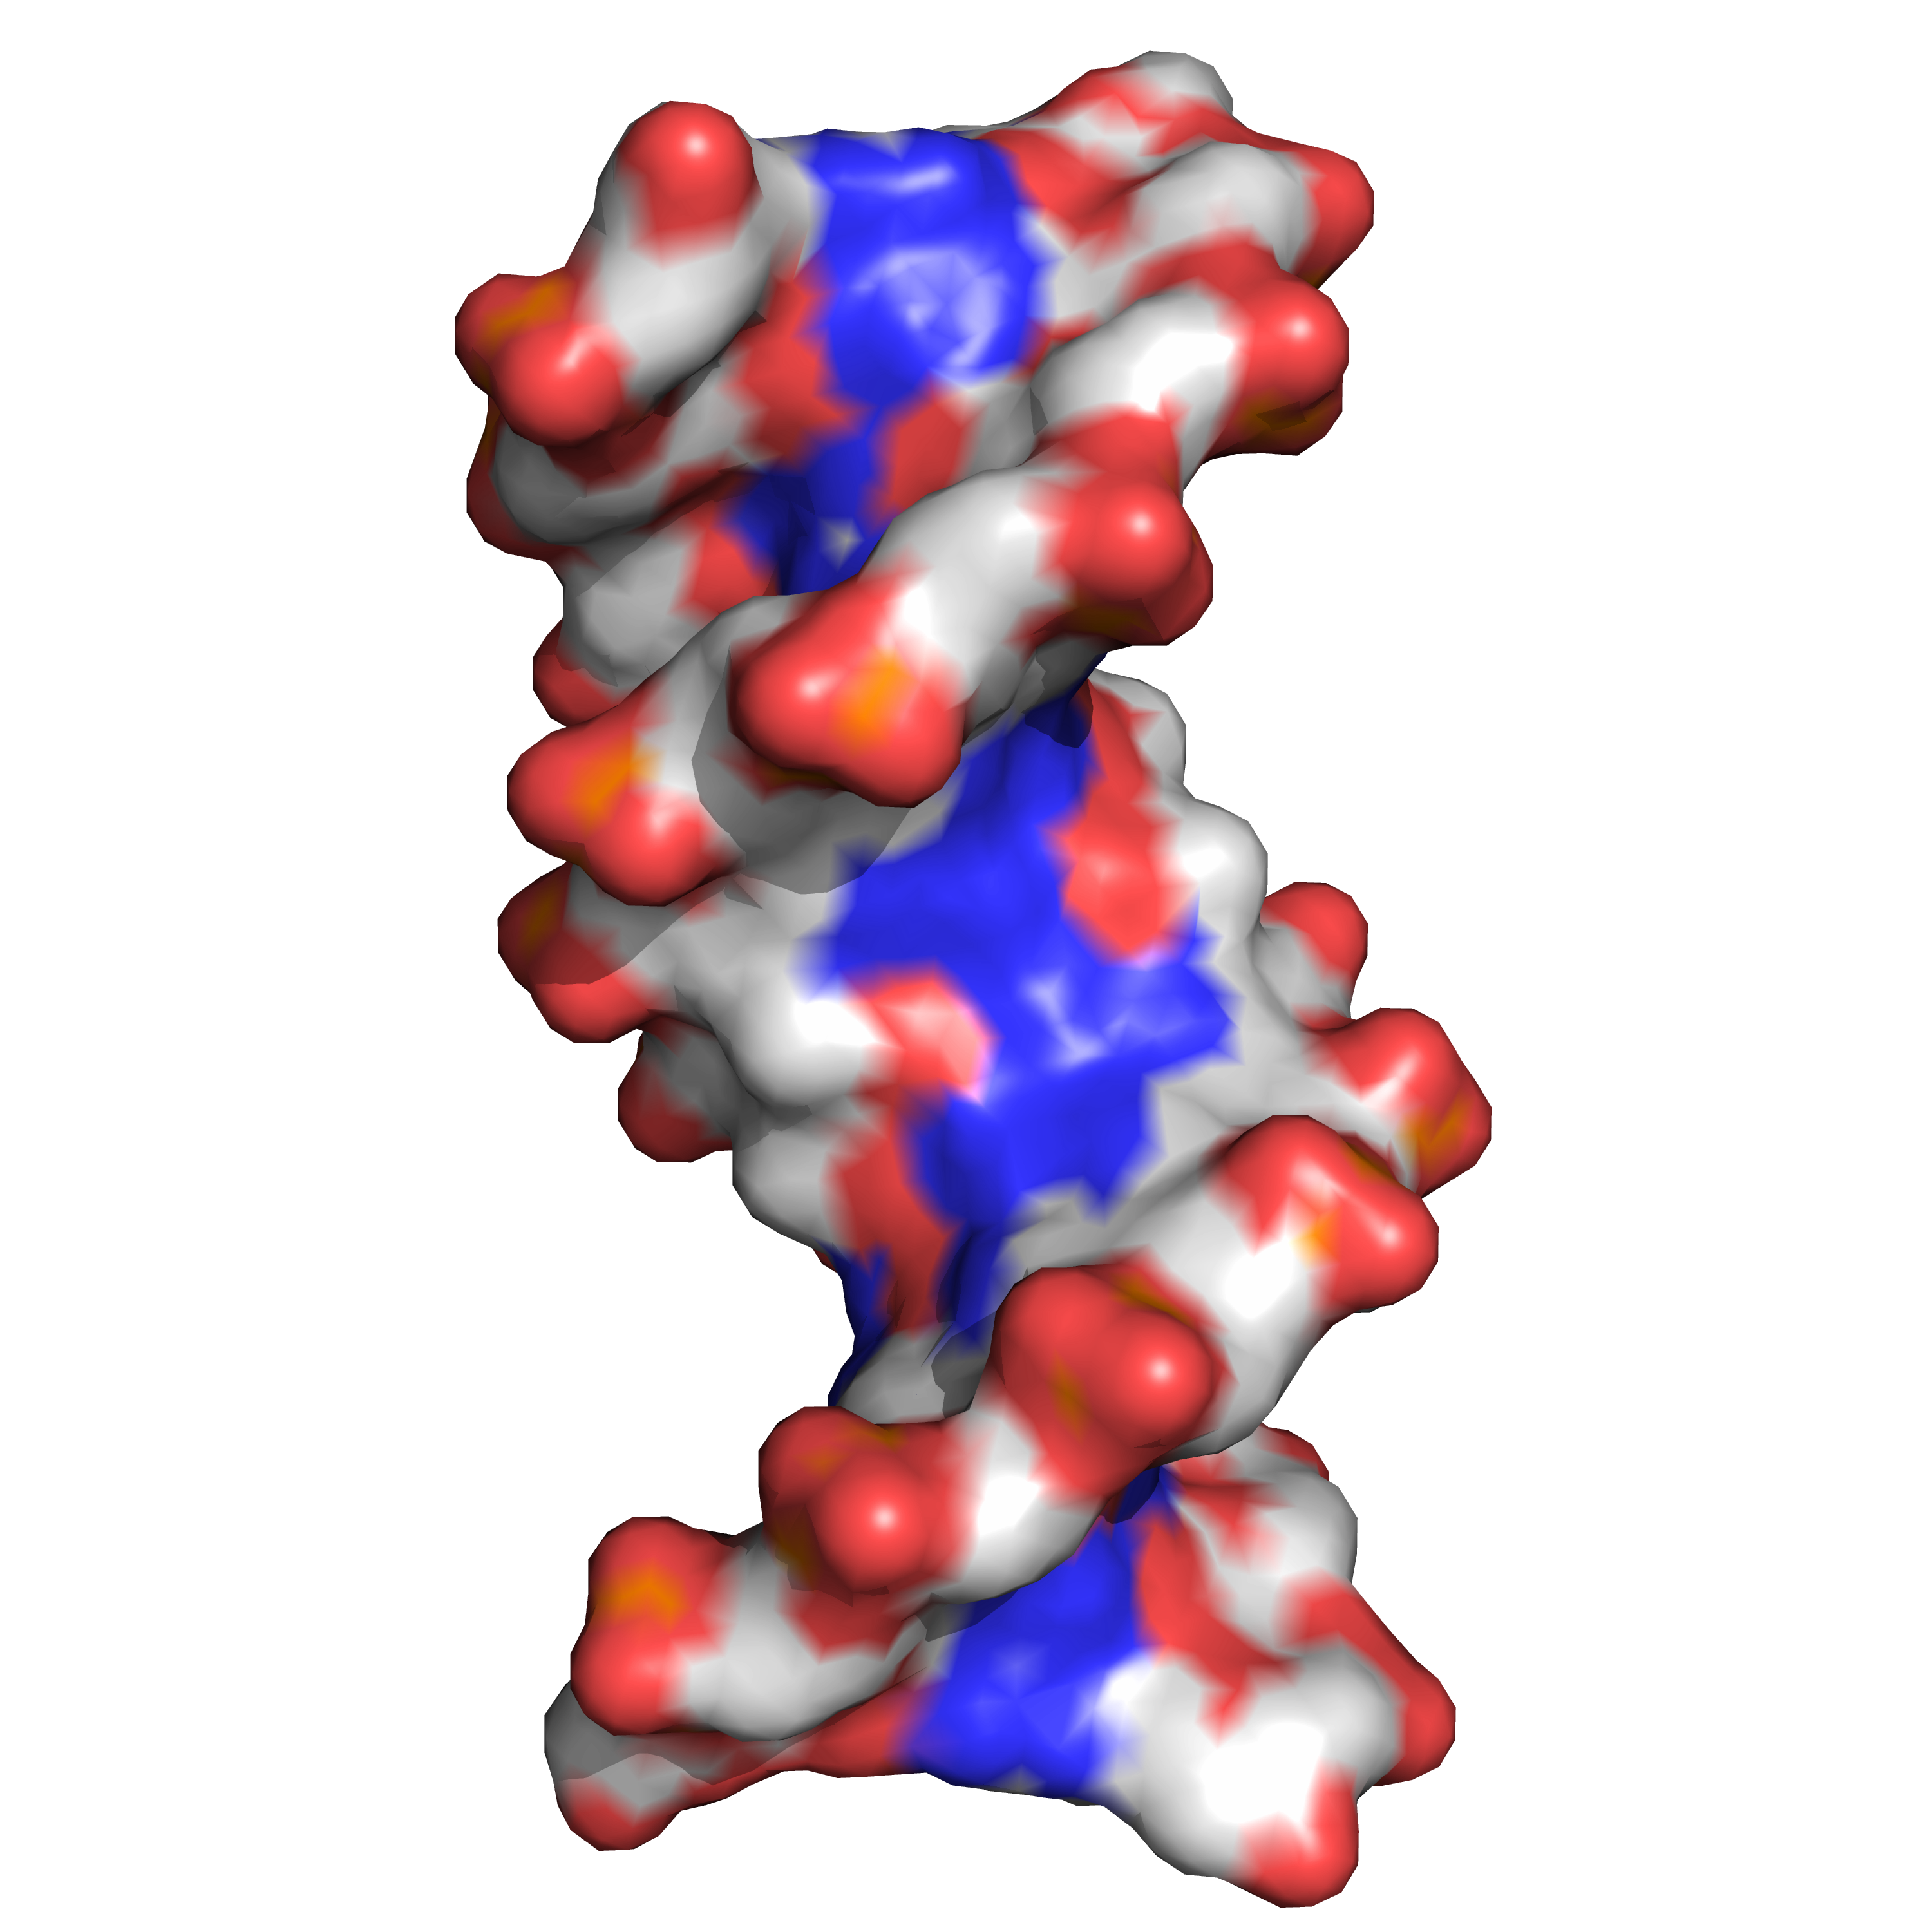 DNA major and minor grooves. PDB 1bna rendered with open source molecular visualization tool PyMol.)